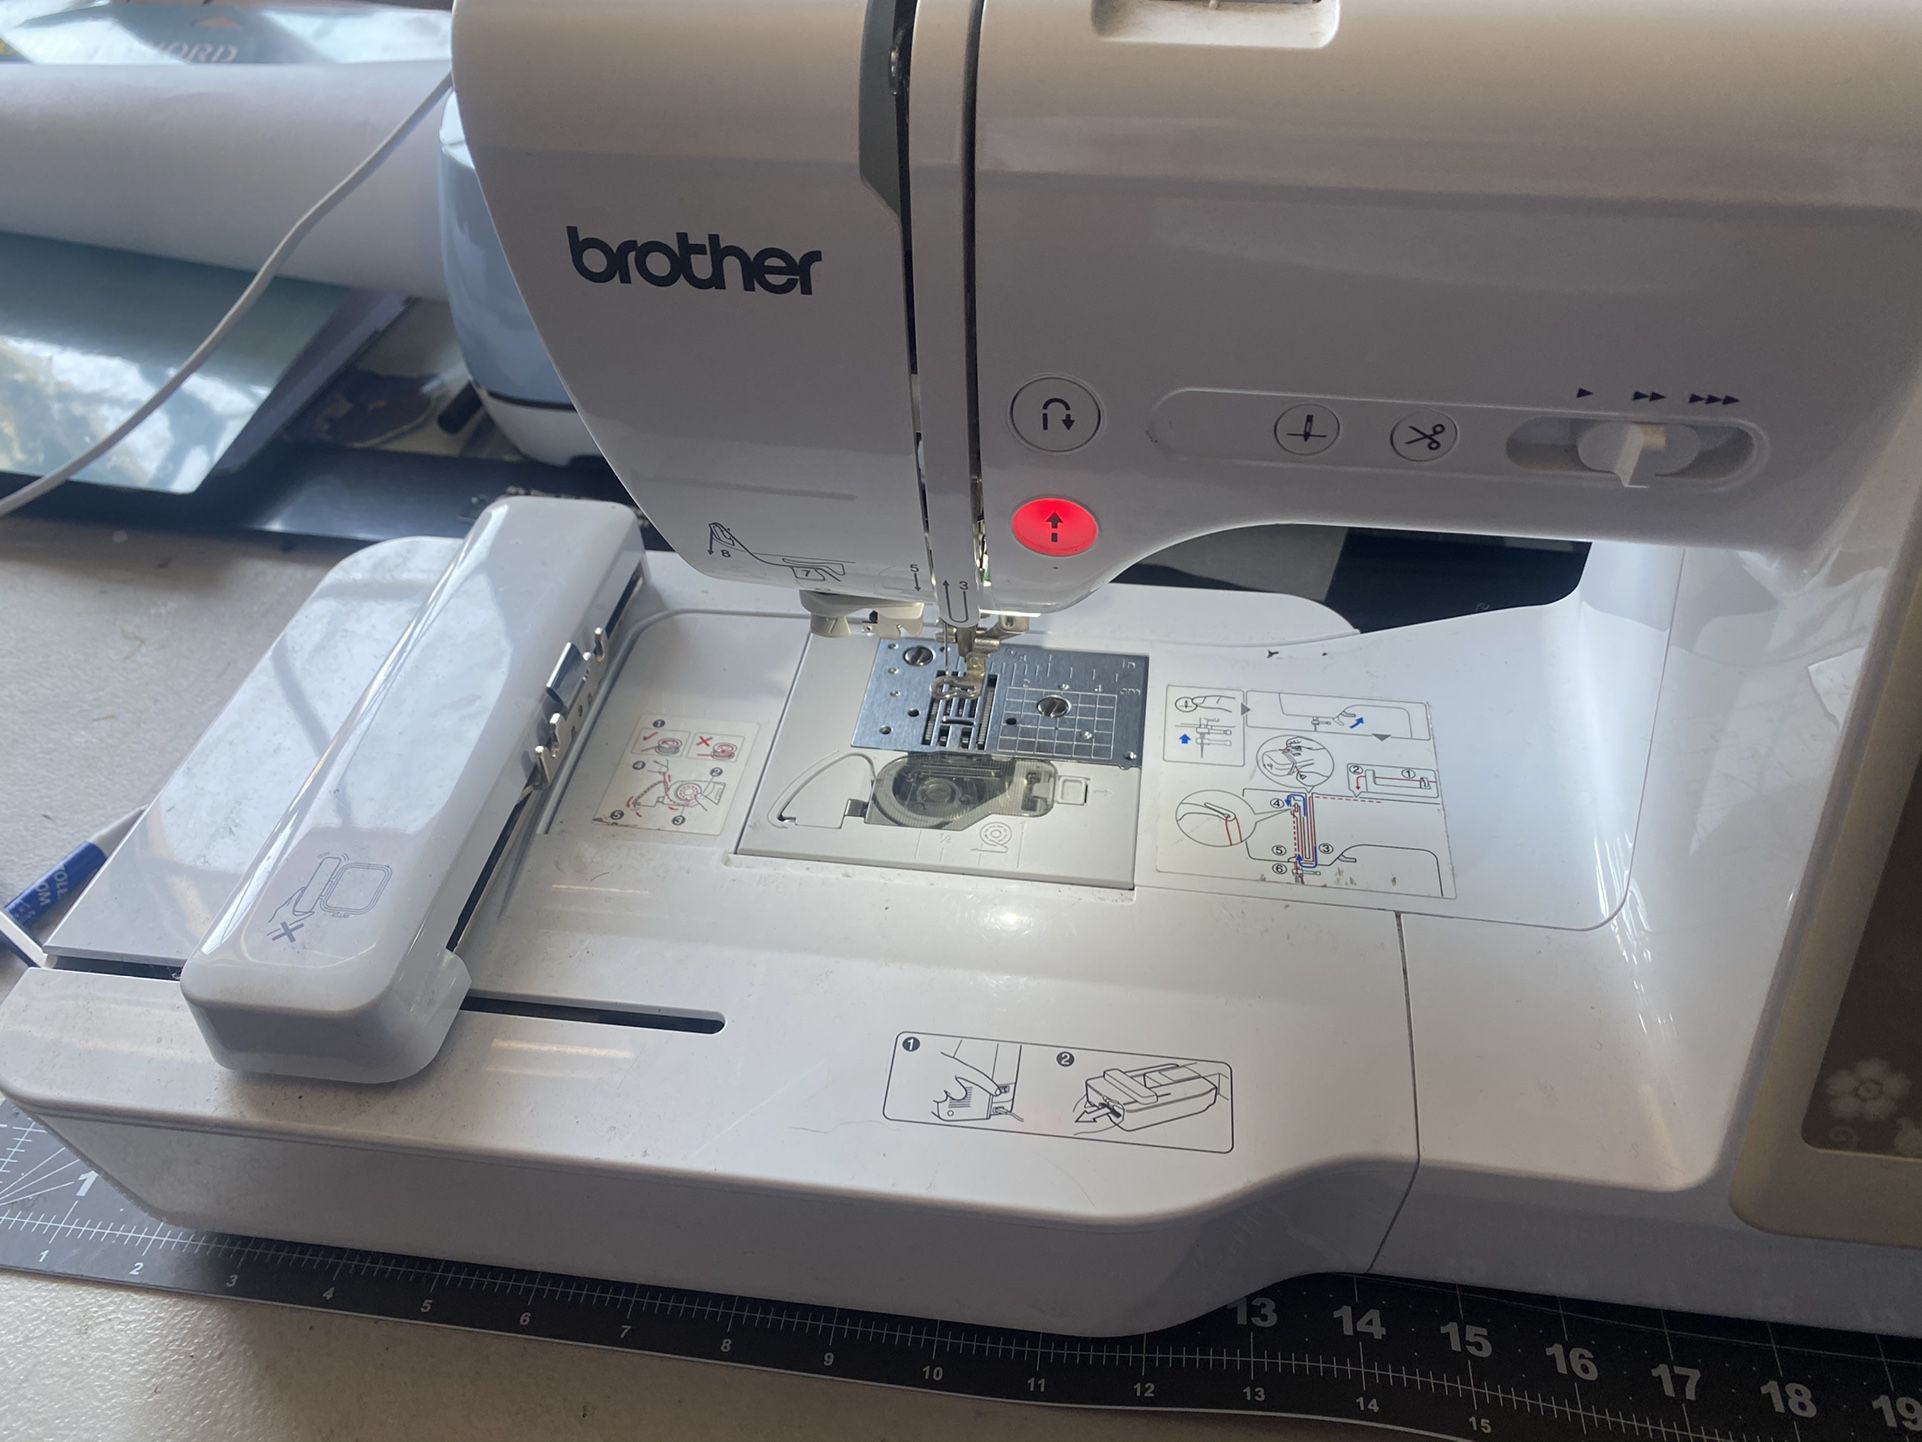 Brother SE625 Sewing & Embroidery Machine for Sale in Lakeland, FL - OfferUp